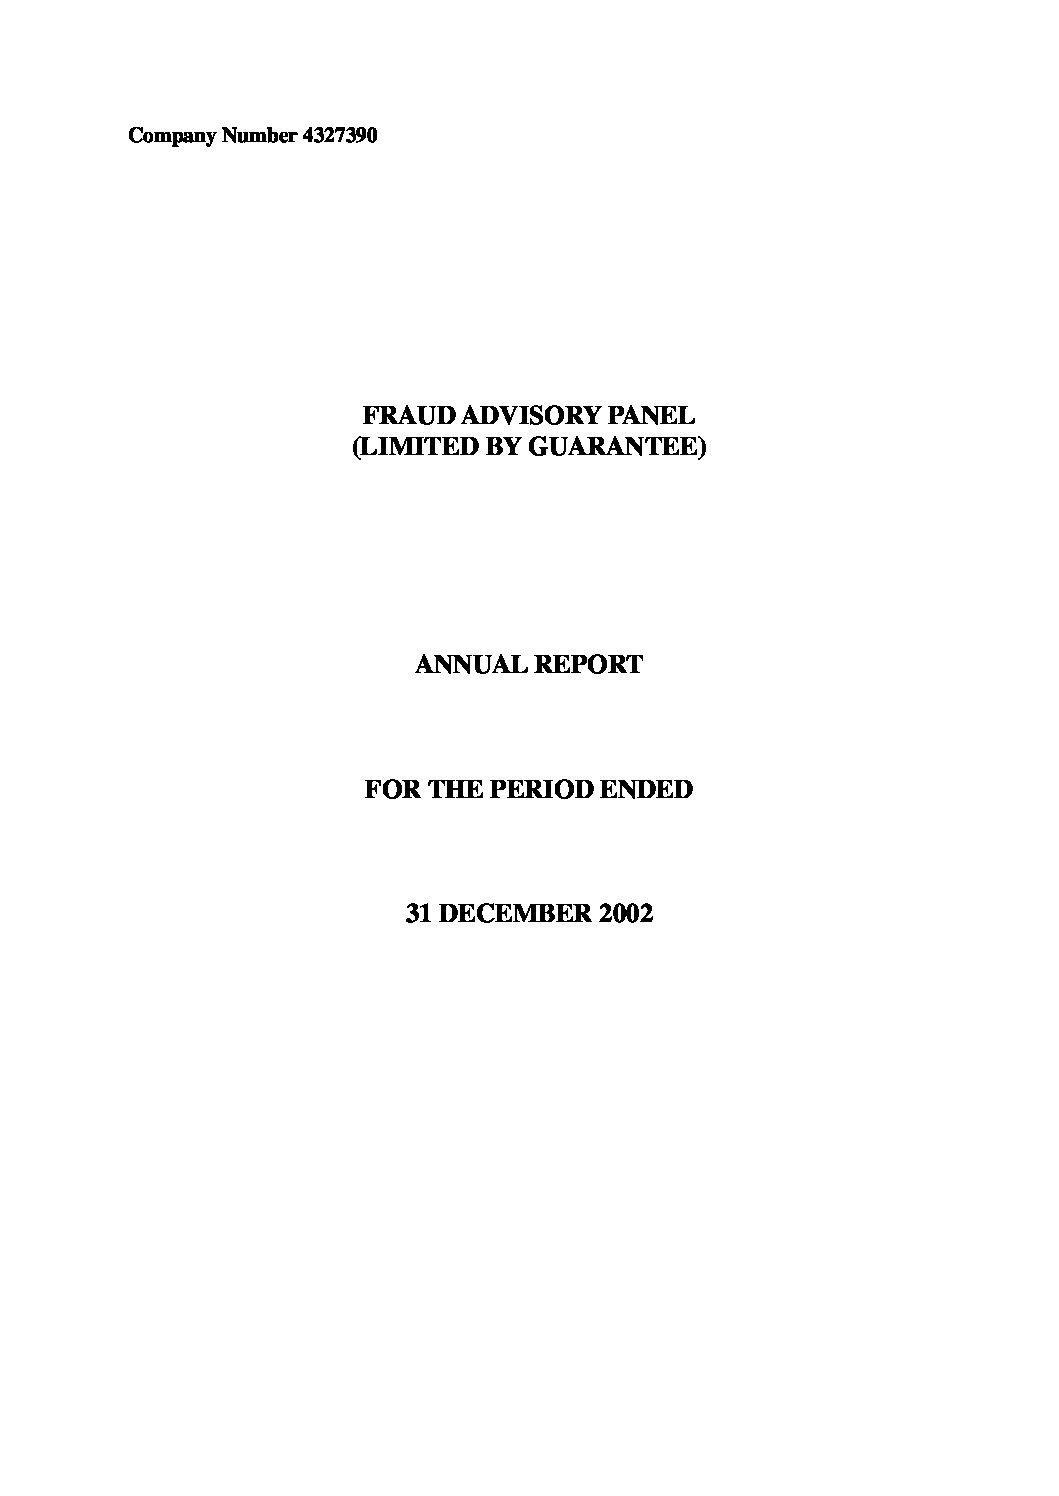 Annual Report and Accounts 2002 document cover